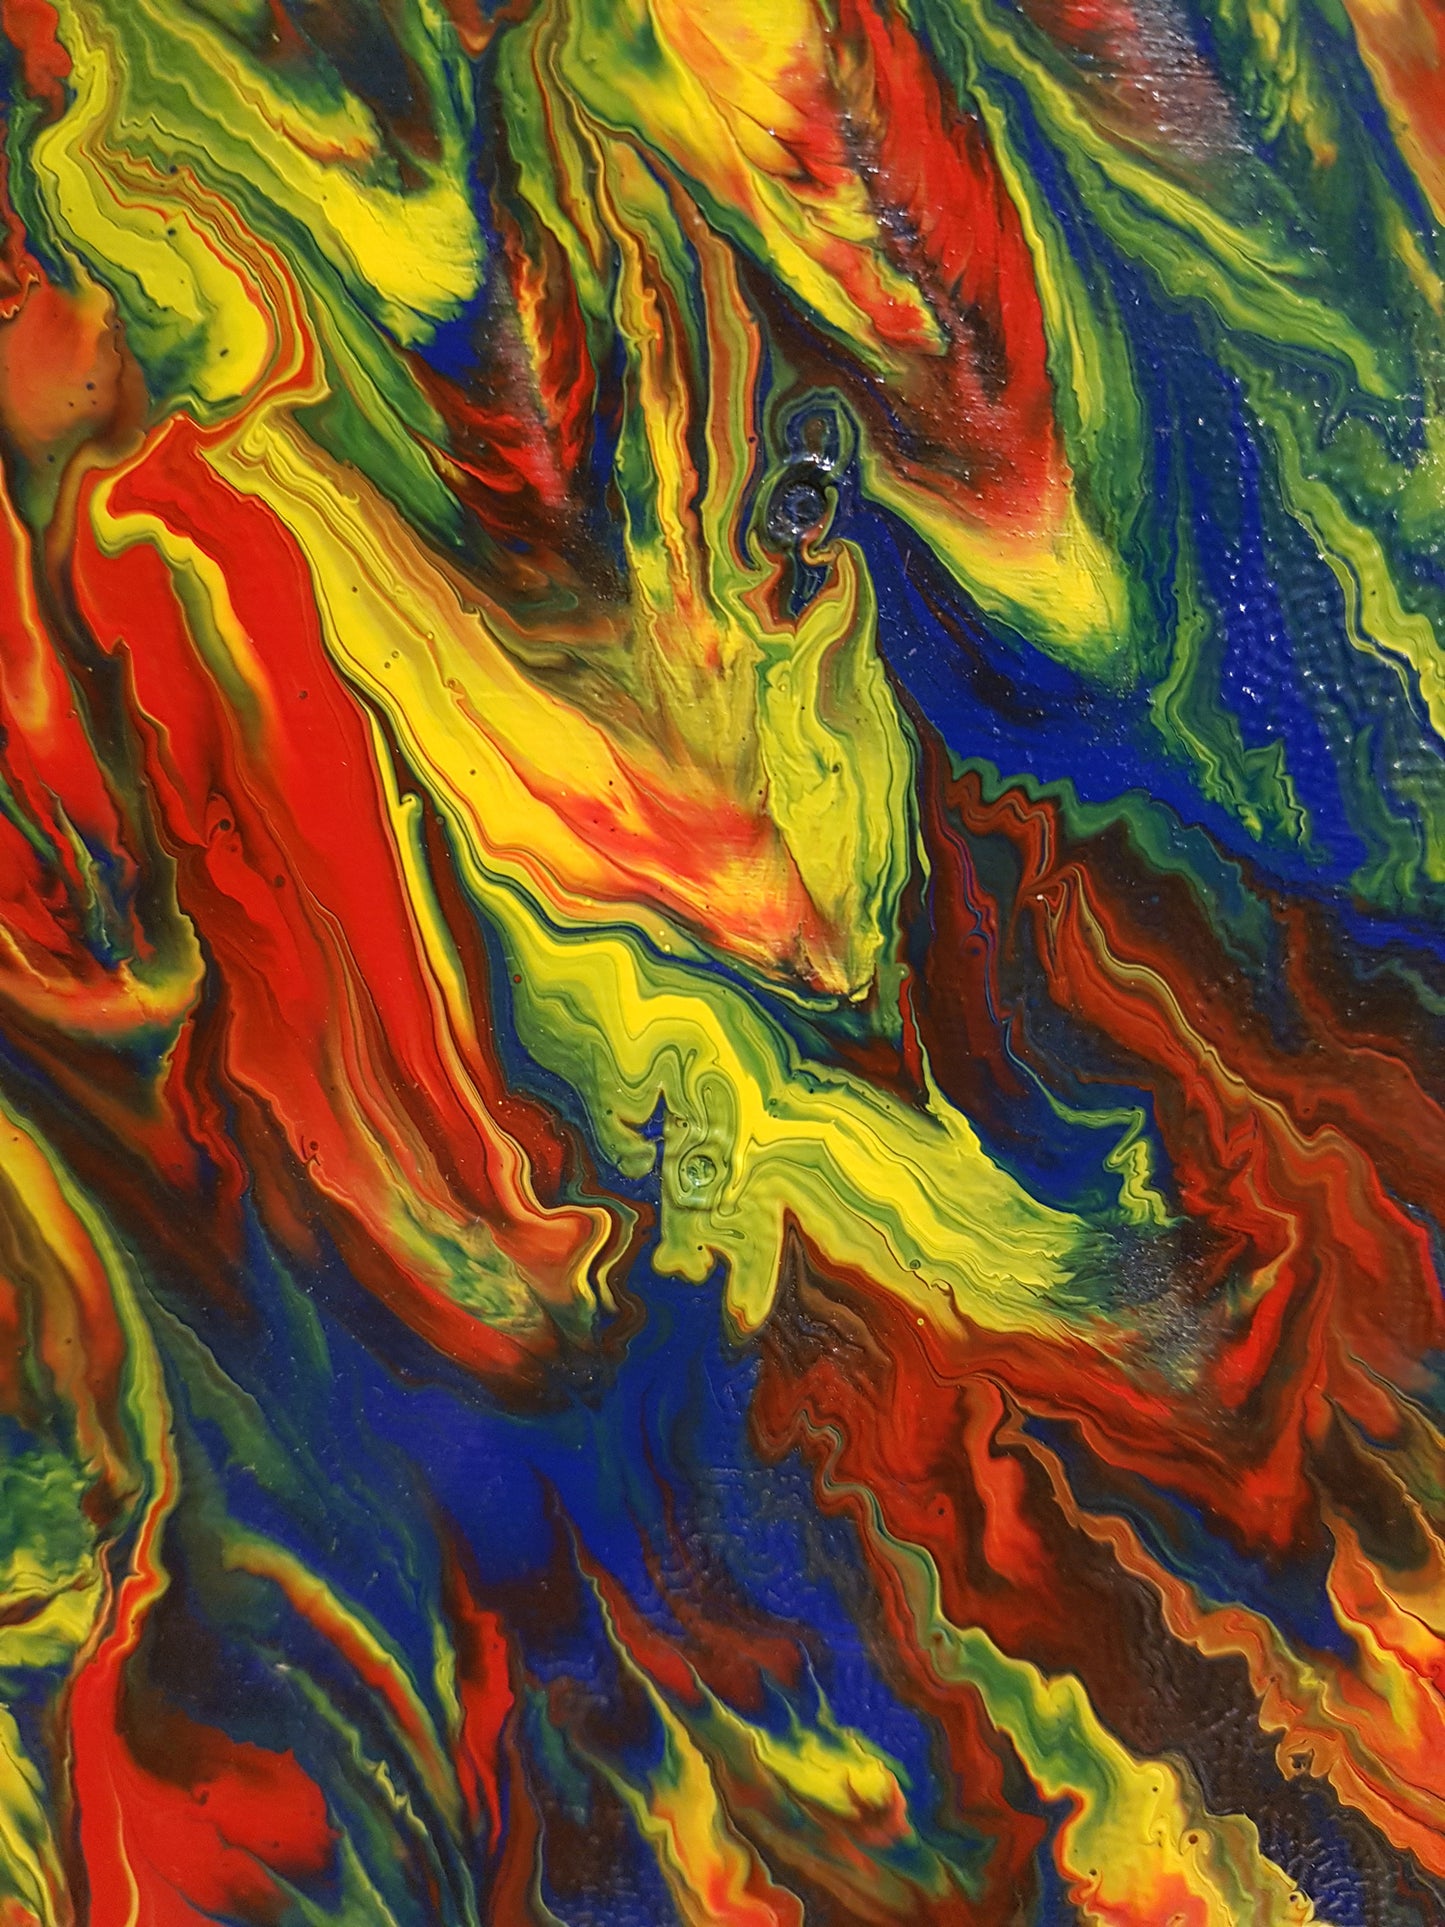 Primary-Flames-of-Passion-by-Alexandra-Romano-Art-Beautiful-Fiery-Abstract-Paintings-Sale-Blue-Red-Yellow-Colorful-Acrylics